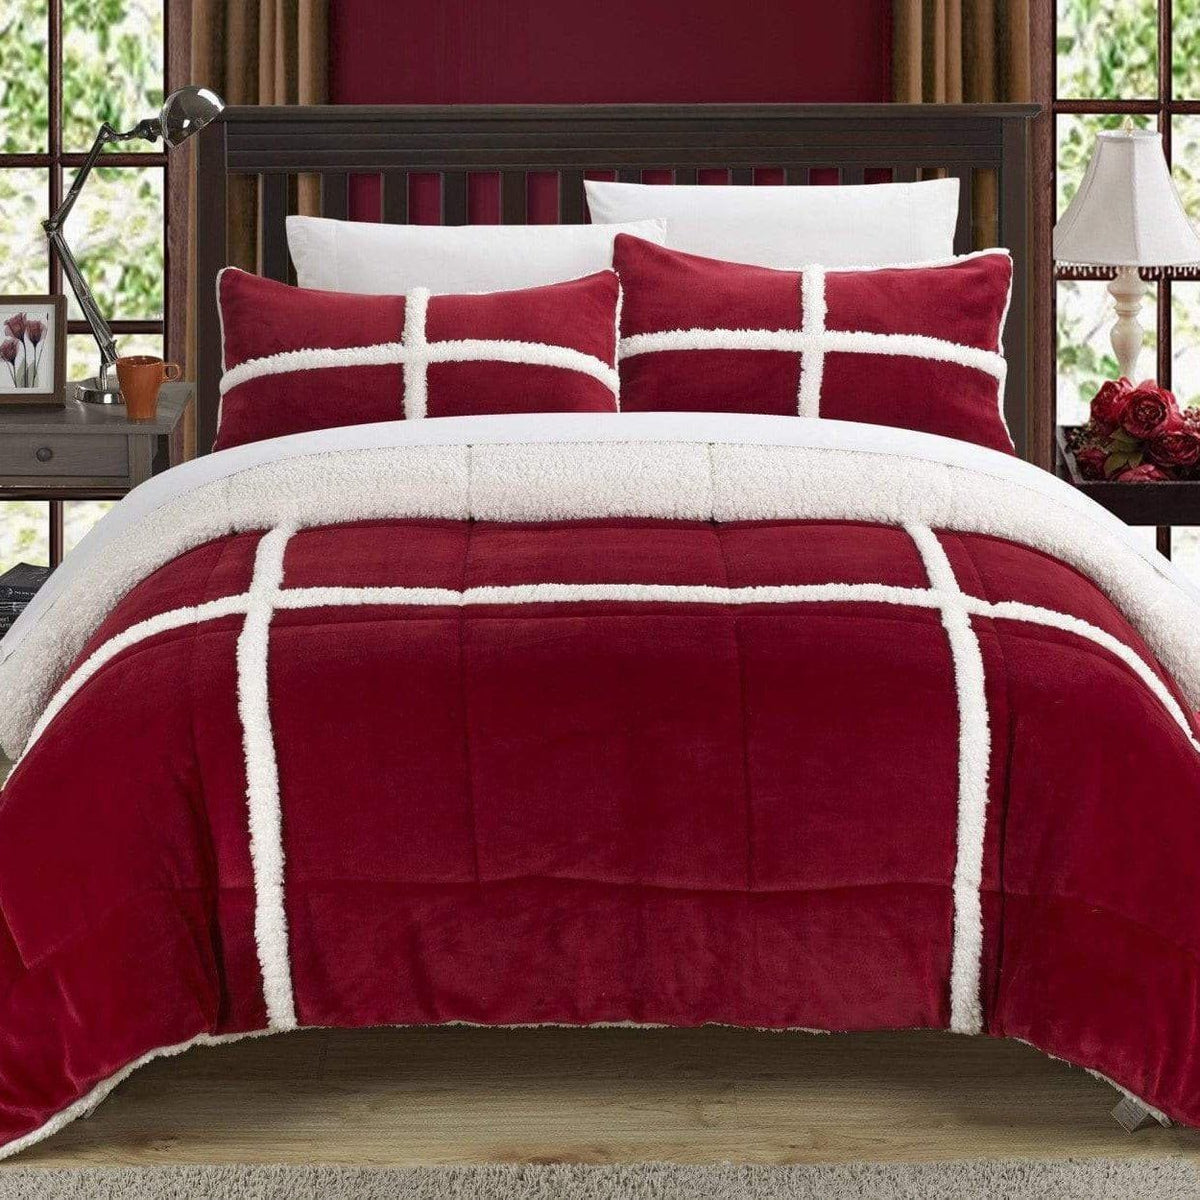 Chic Home Chloe 7 Piece Sherpa Comforter Set Red